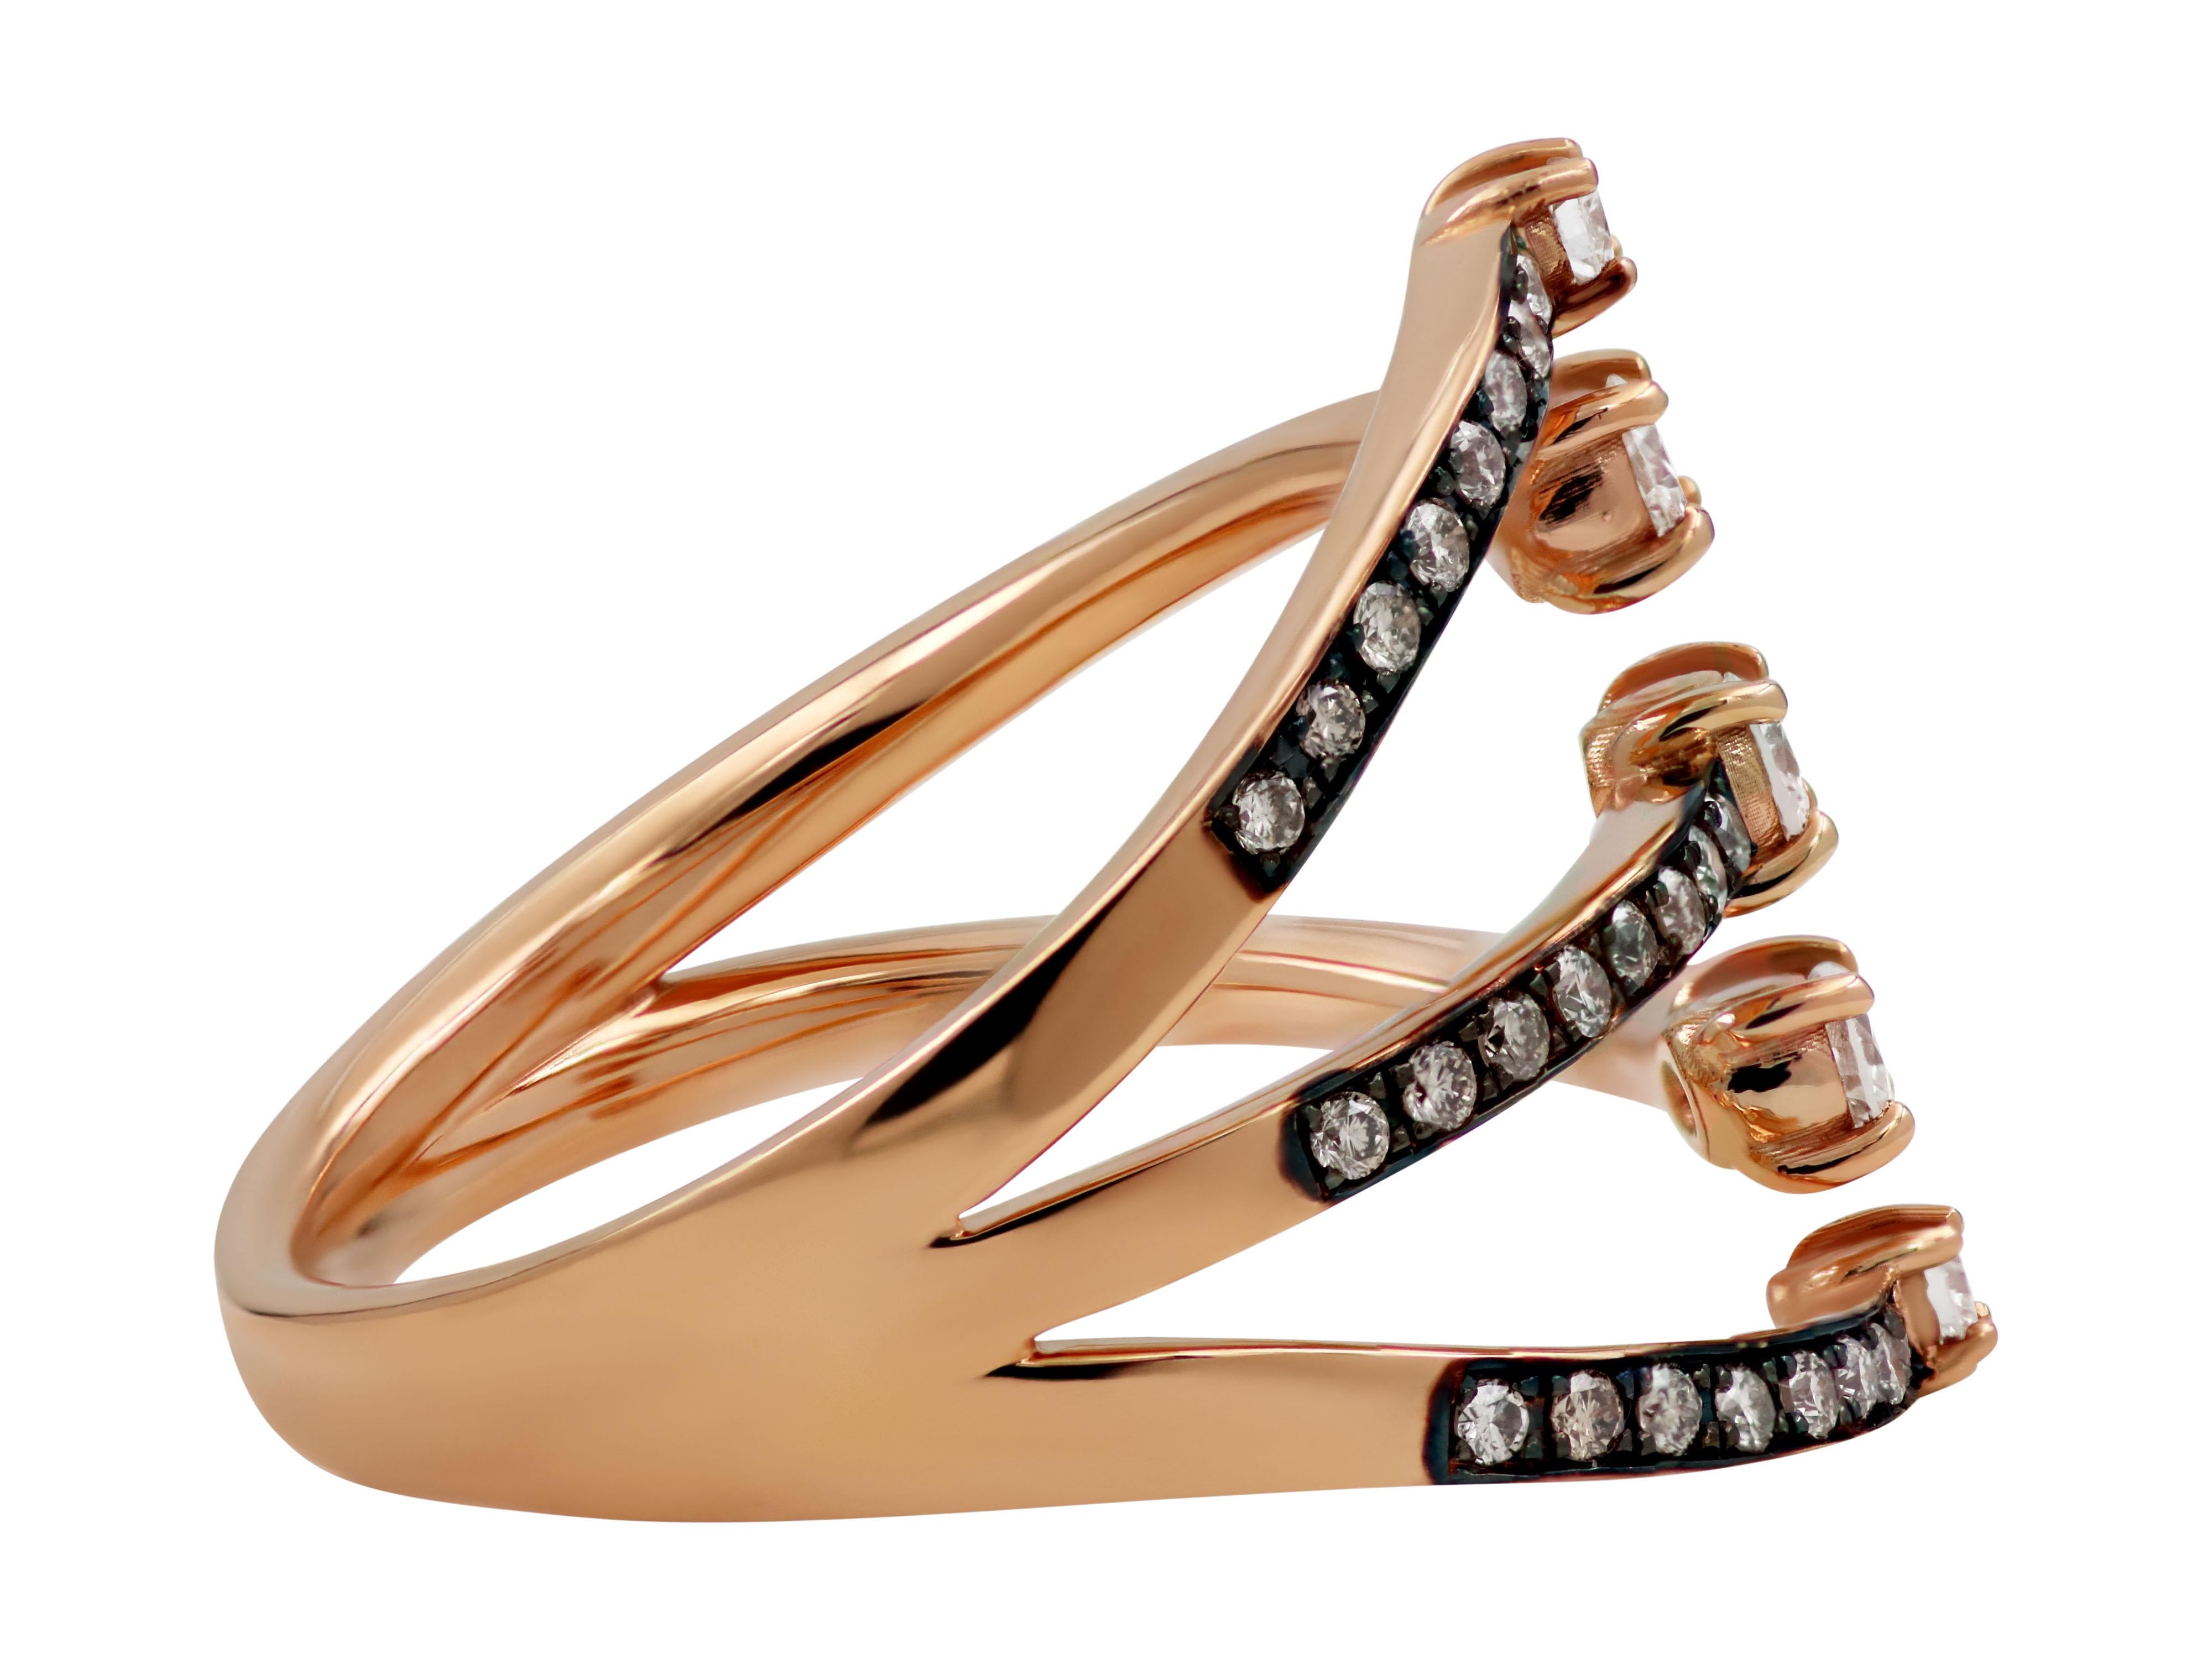 Modern ring in 18k rose gold with five brilliant cut diamonds total 0.54 carats.

Width: 0.708”, 1.8cm